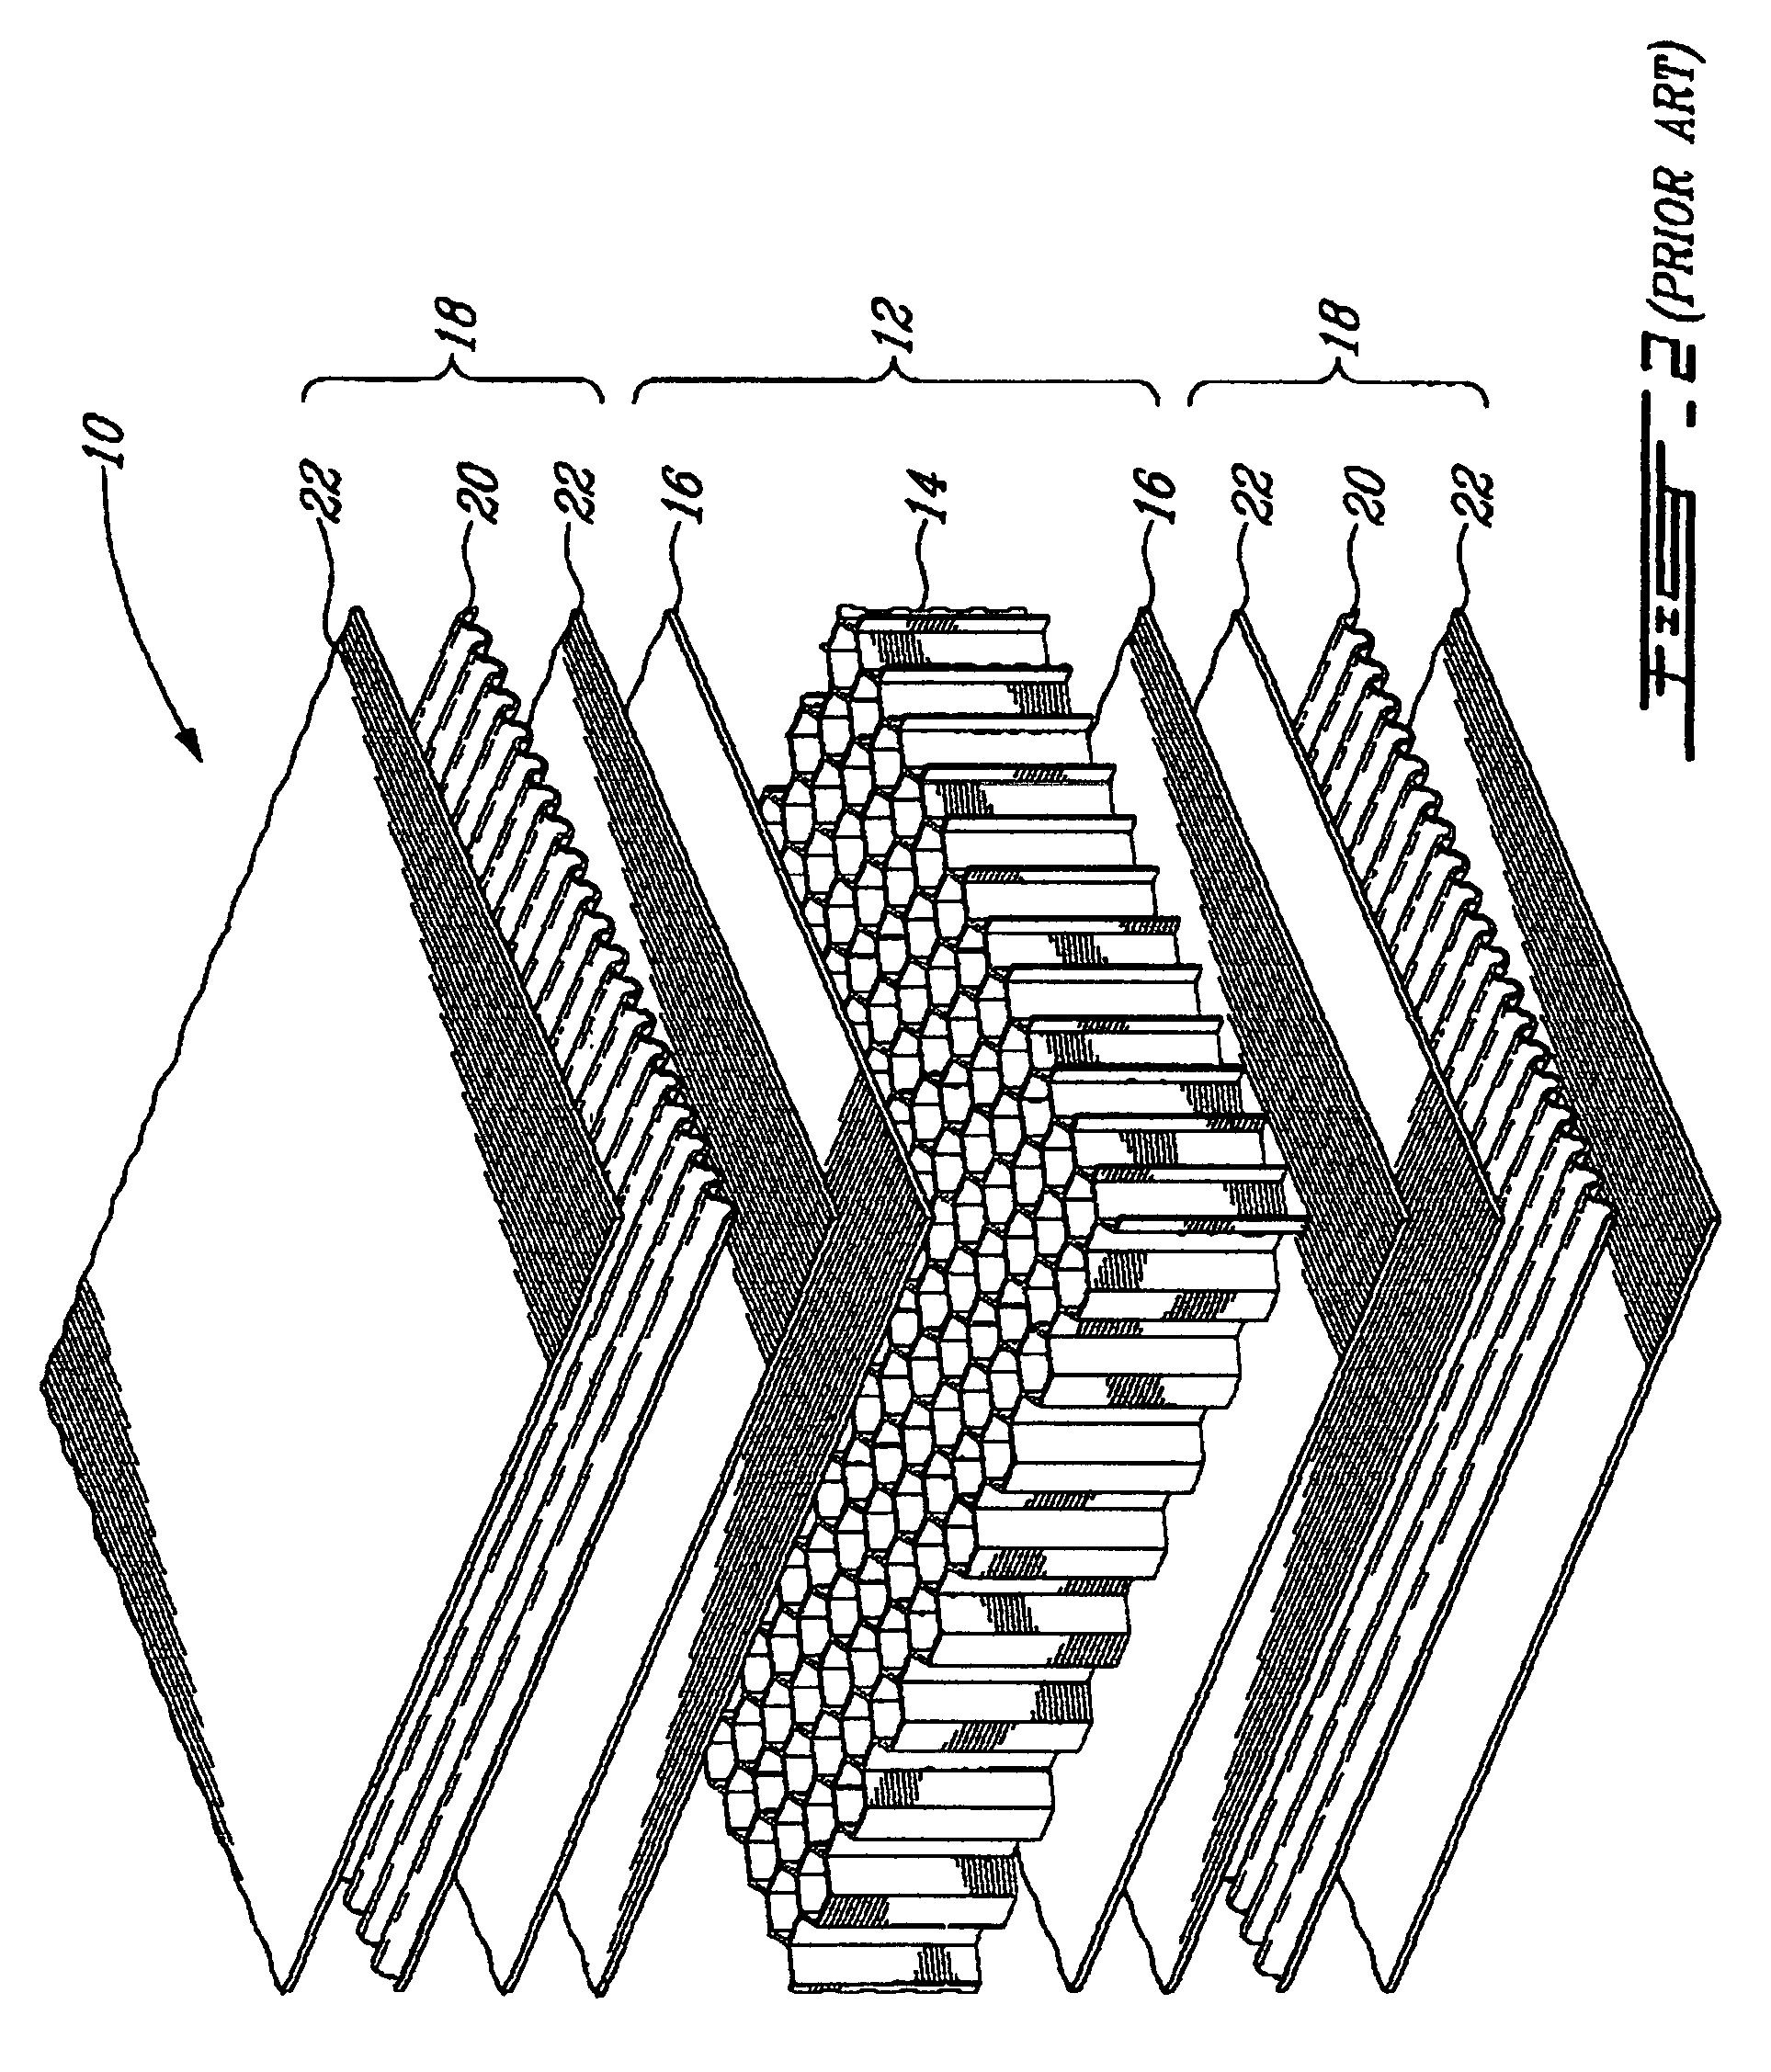 Process and apparatus for manufacturing a honeycomb composite material